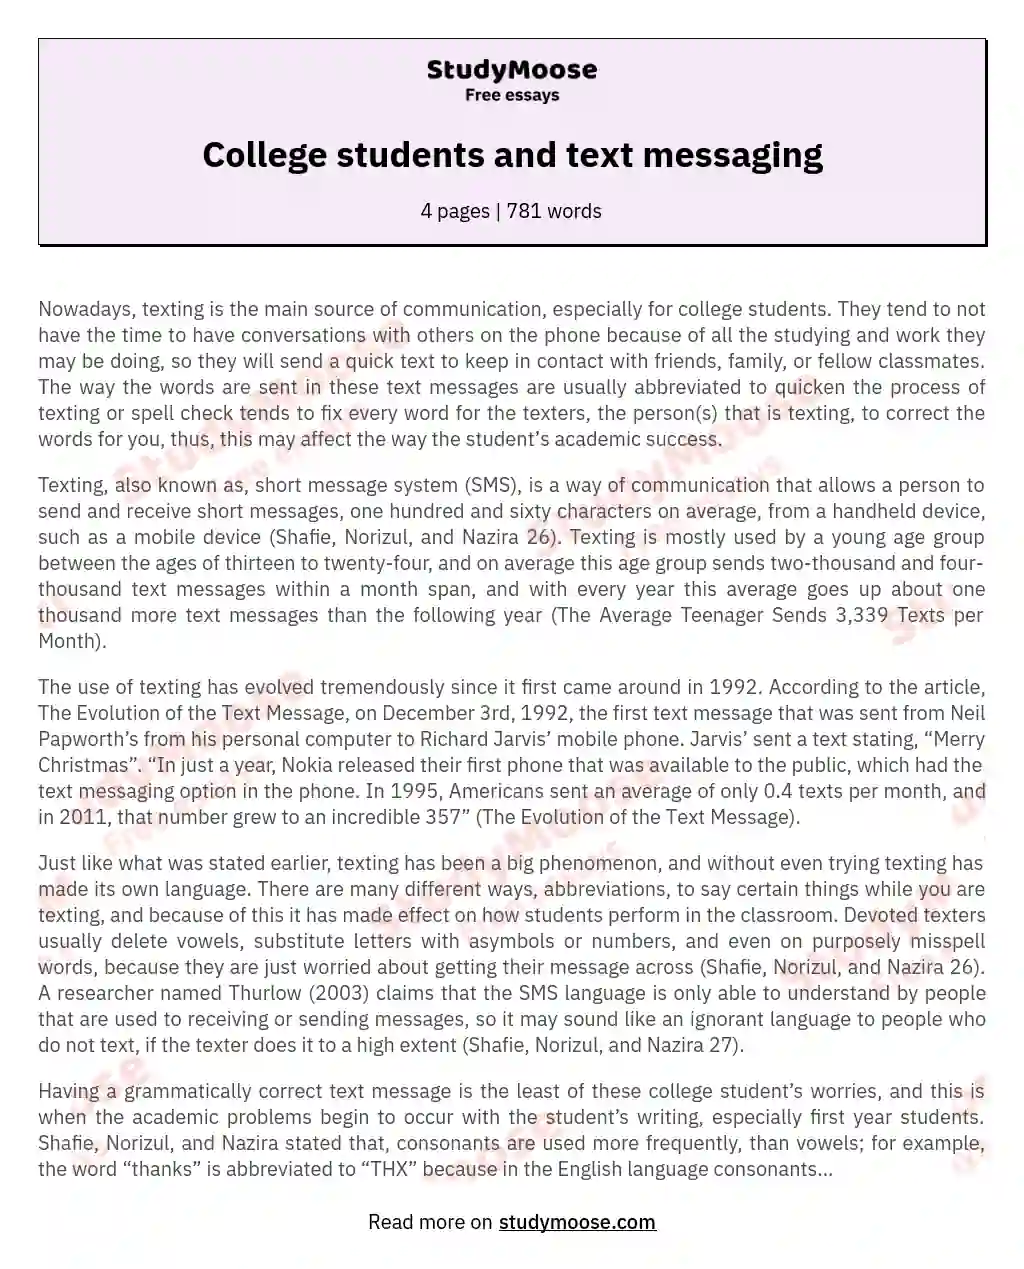 College students and text messaging